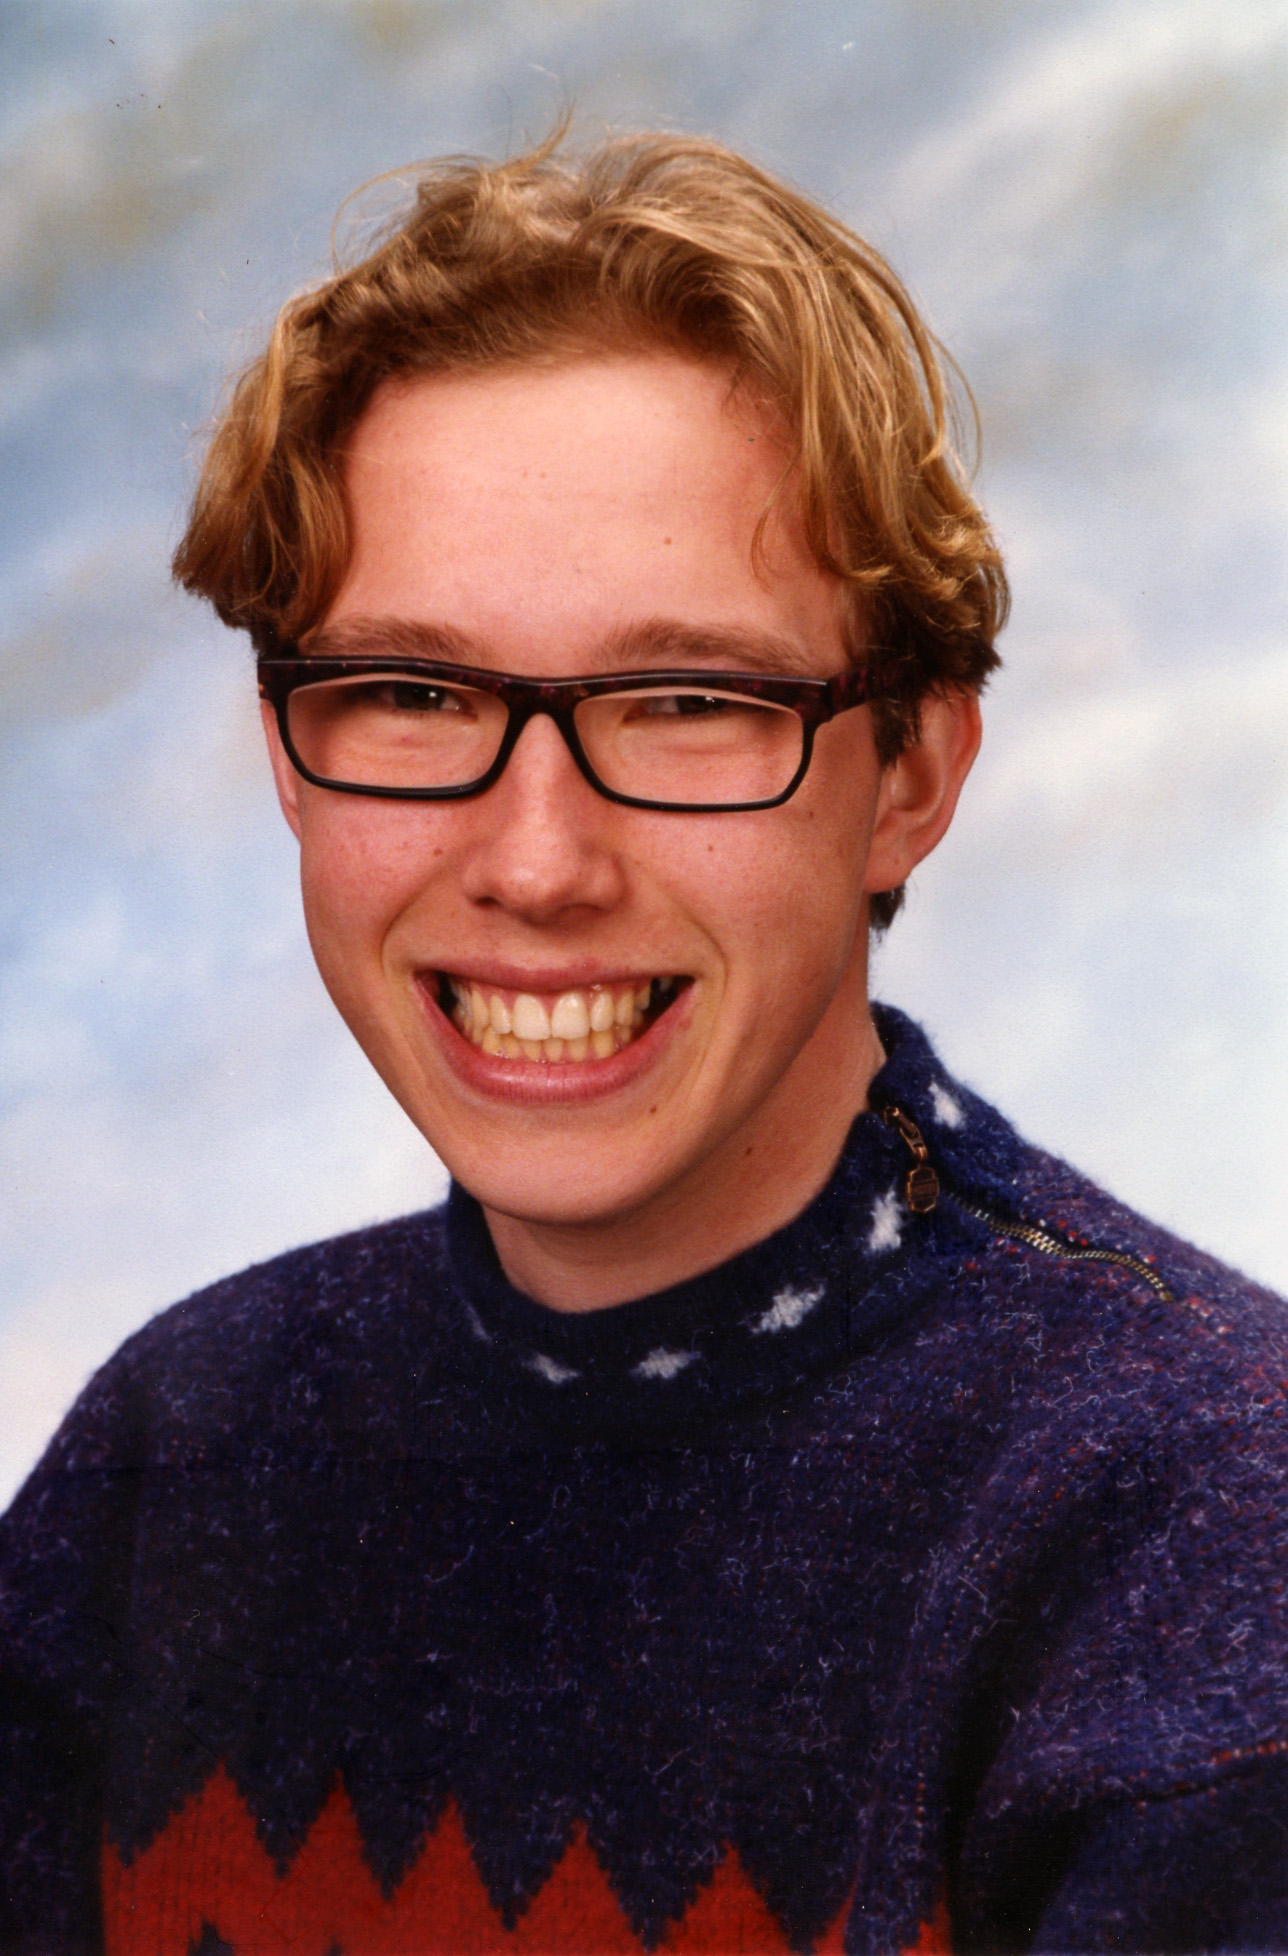 a smiling man is wearing glasses and a sweater